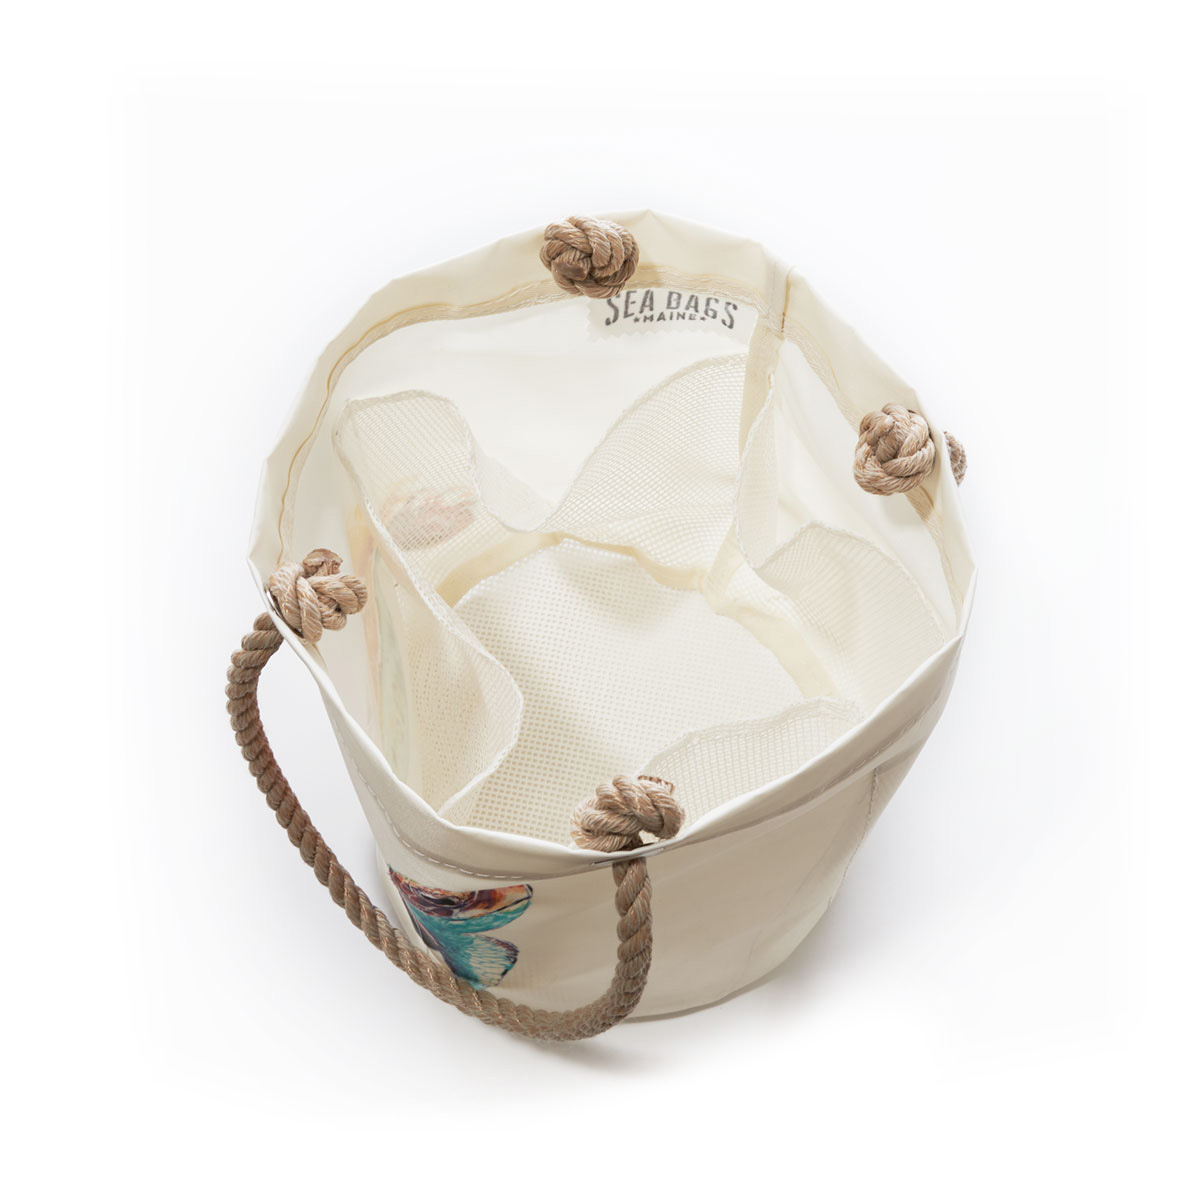 inside view showing mesh bottom and four mesh pockets, a bright friendly multicolor sea turtle is printed on a white recycled sail cloth beachcomber bucket bag with hemp rope handles